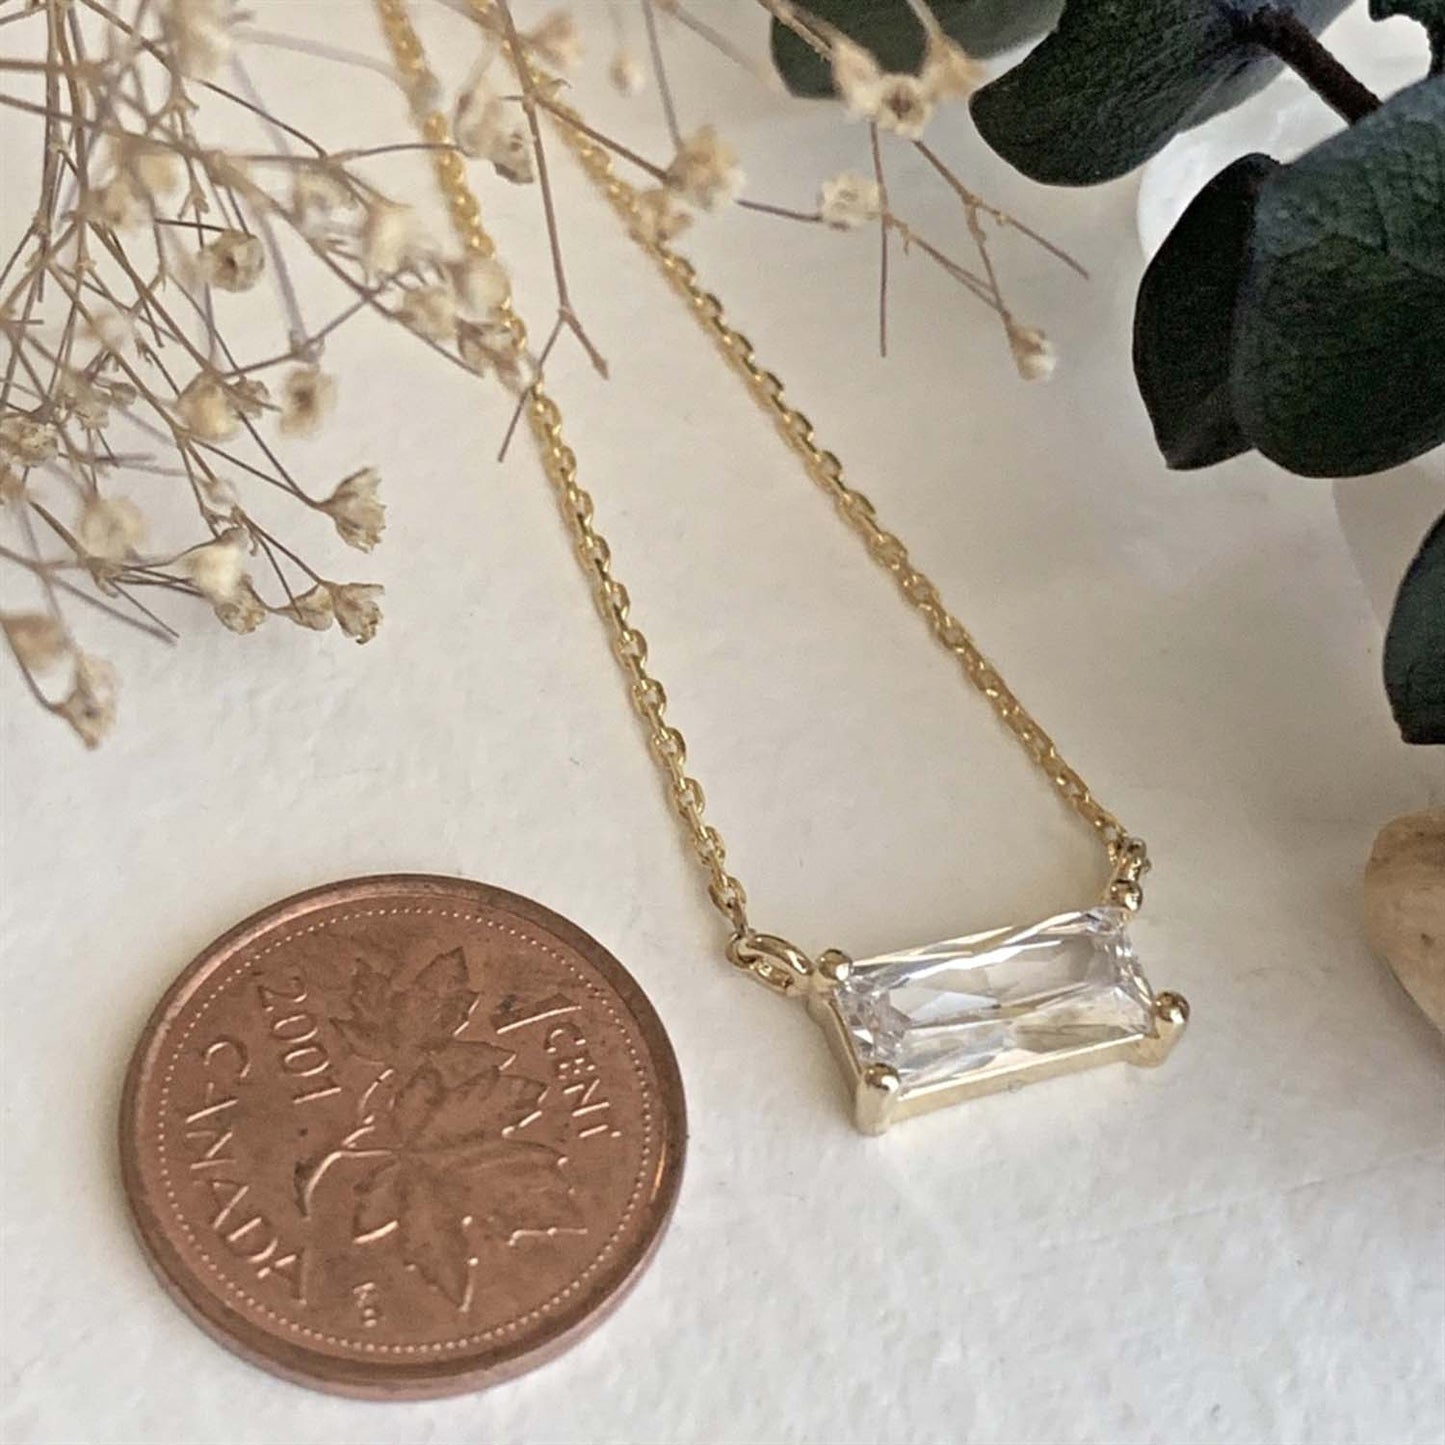 Marseille Baguette Charm Necklace in Gold